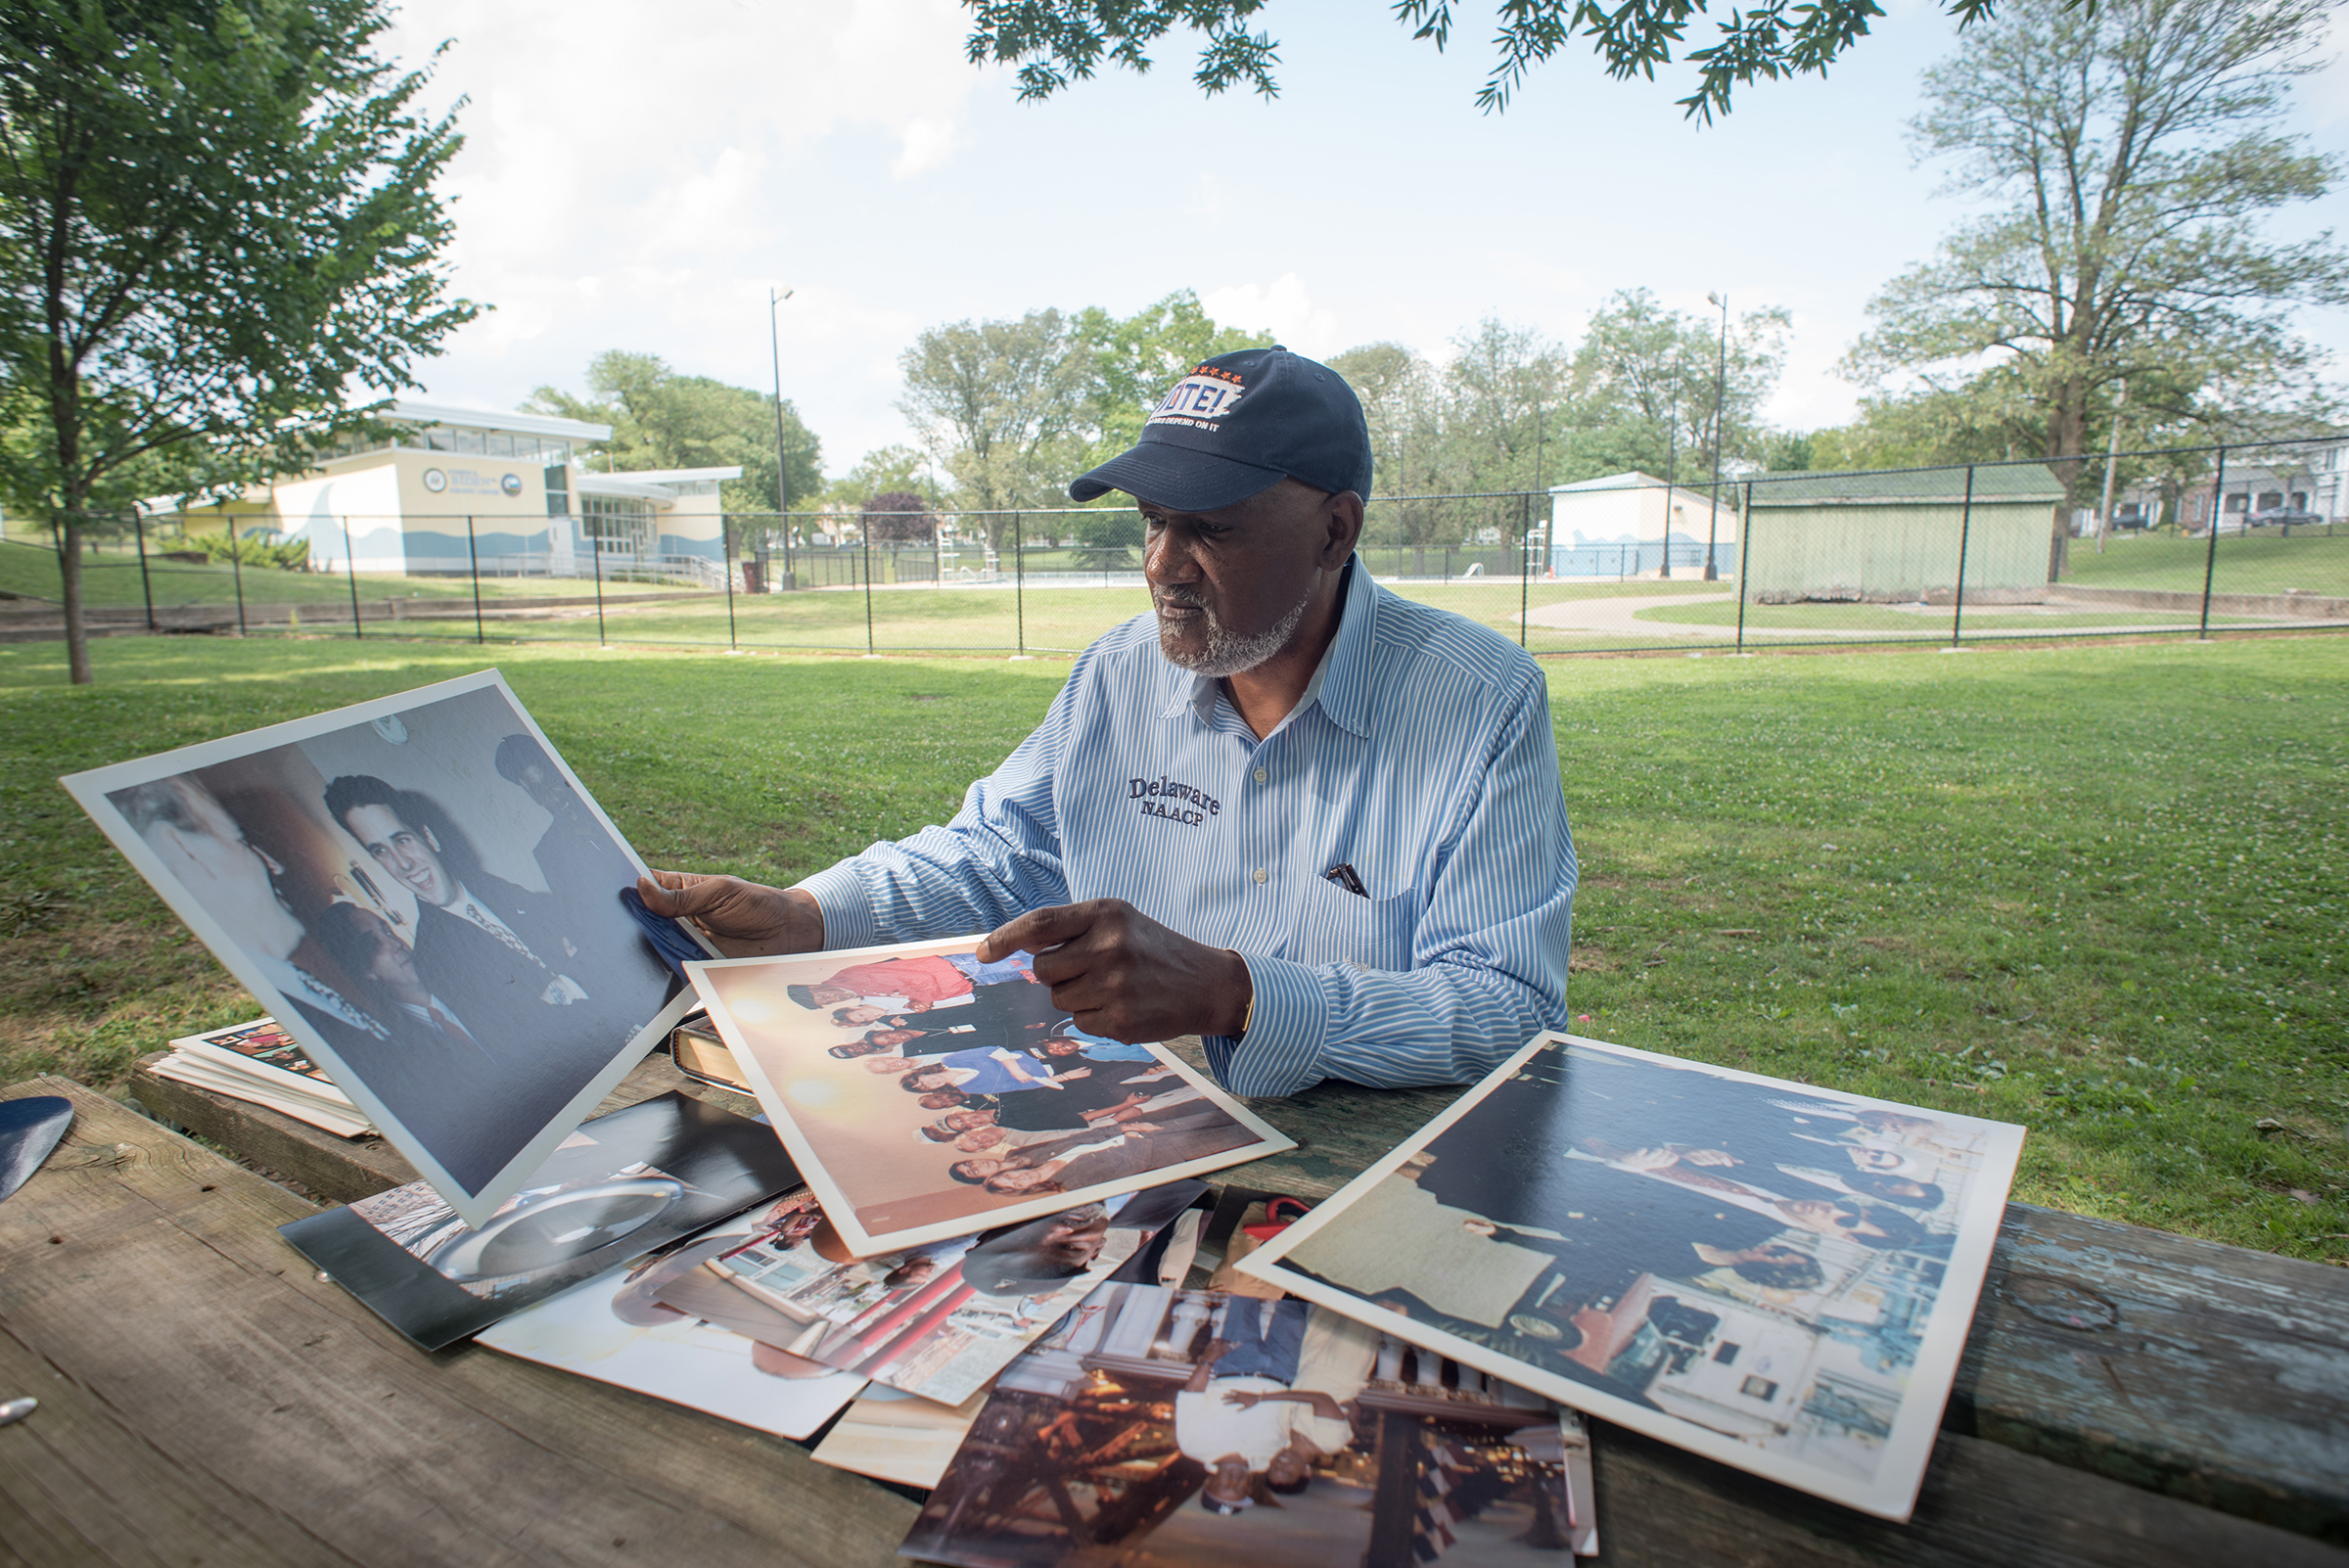 Smith displays some of the photos documenting his work as a Civil Rights leader and his decades long friendship with former Vice President Joe Biden near the pool where they first met as young men in Wilmington, Del. on July 07, 2019 (Andre Chung—The Washington Post/Getty Images)